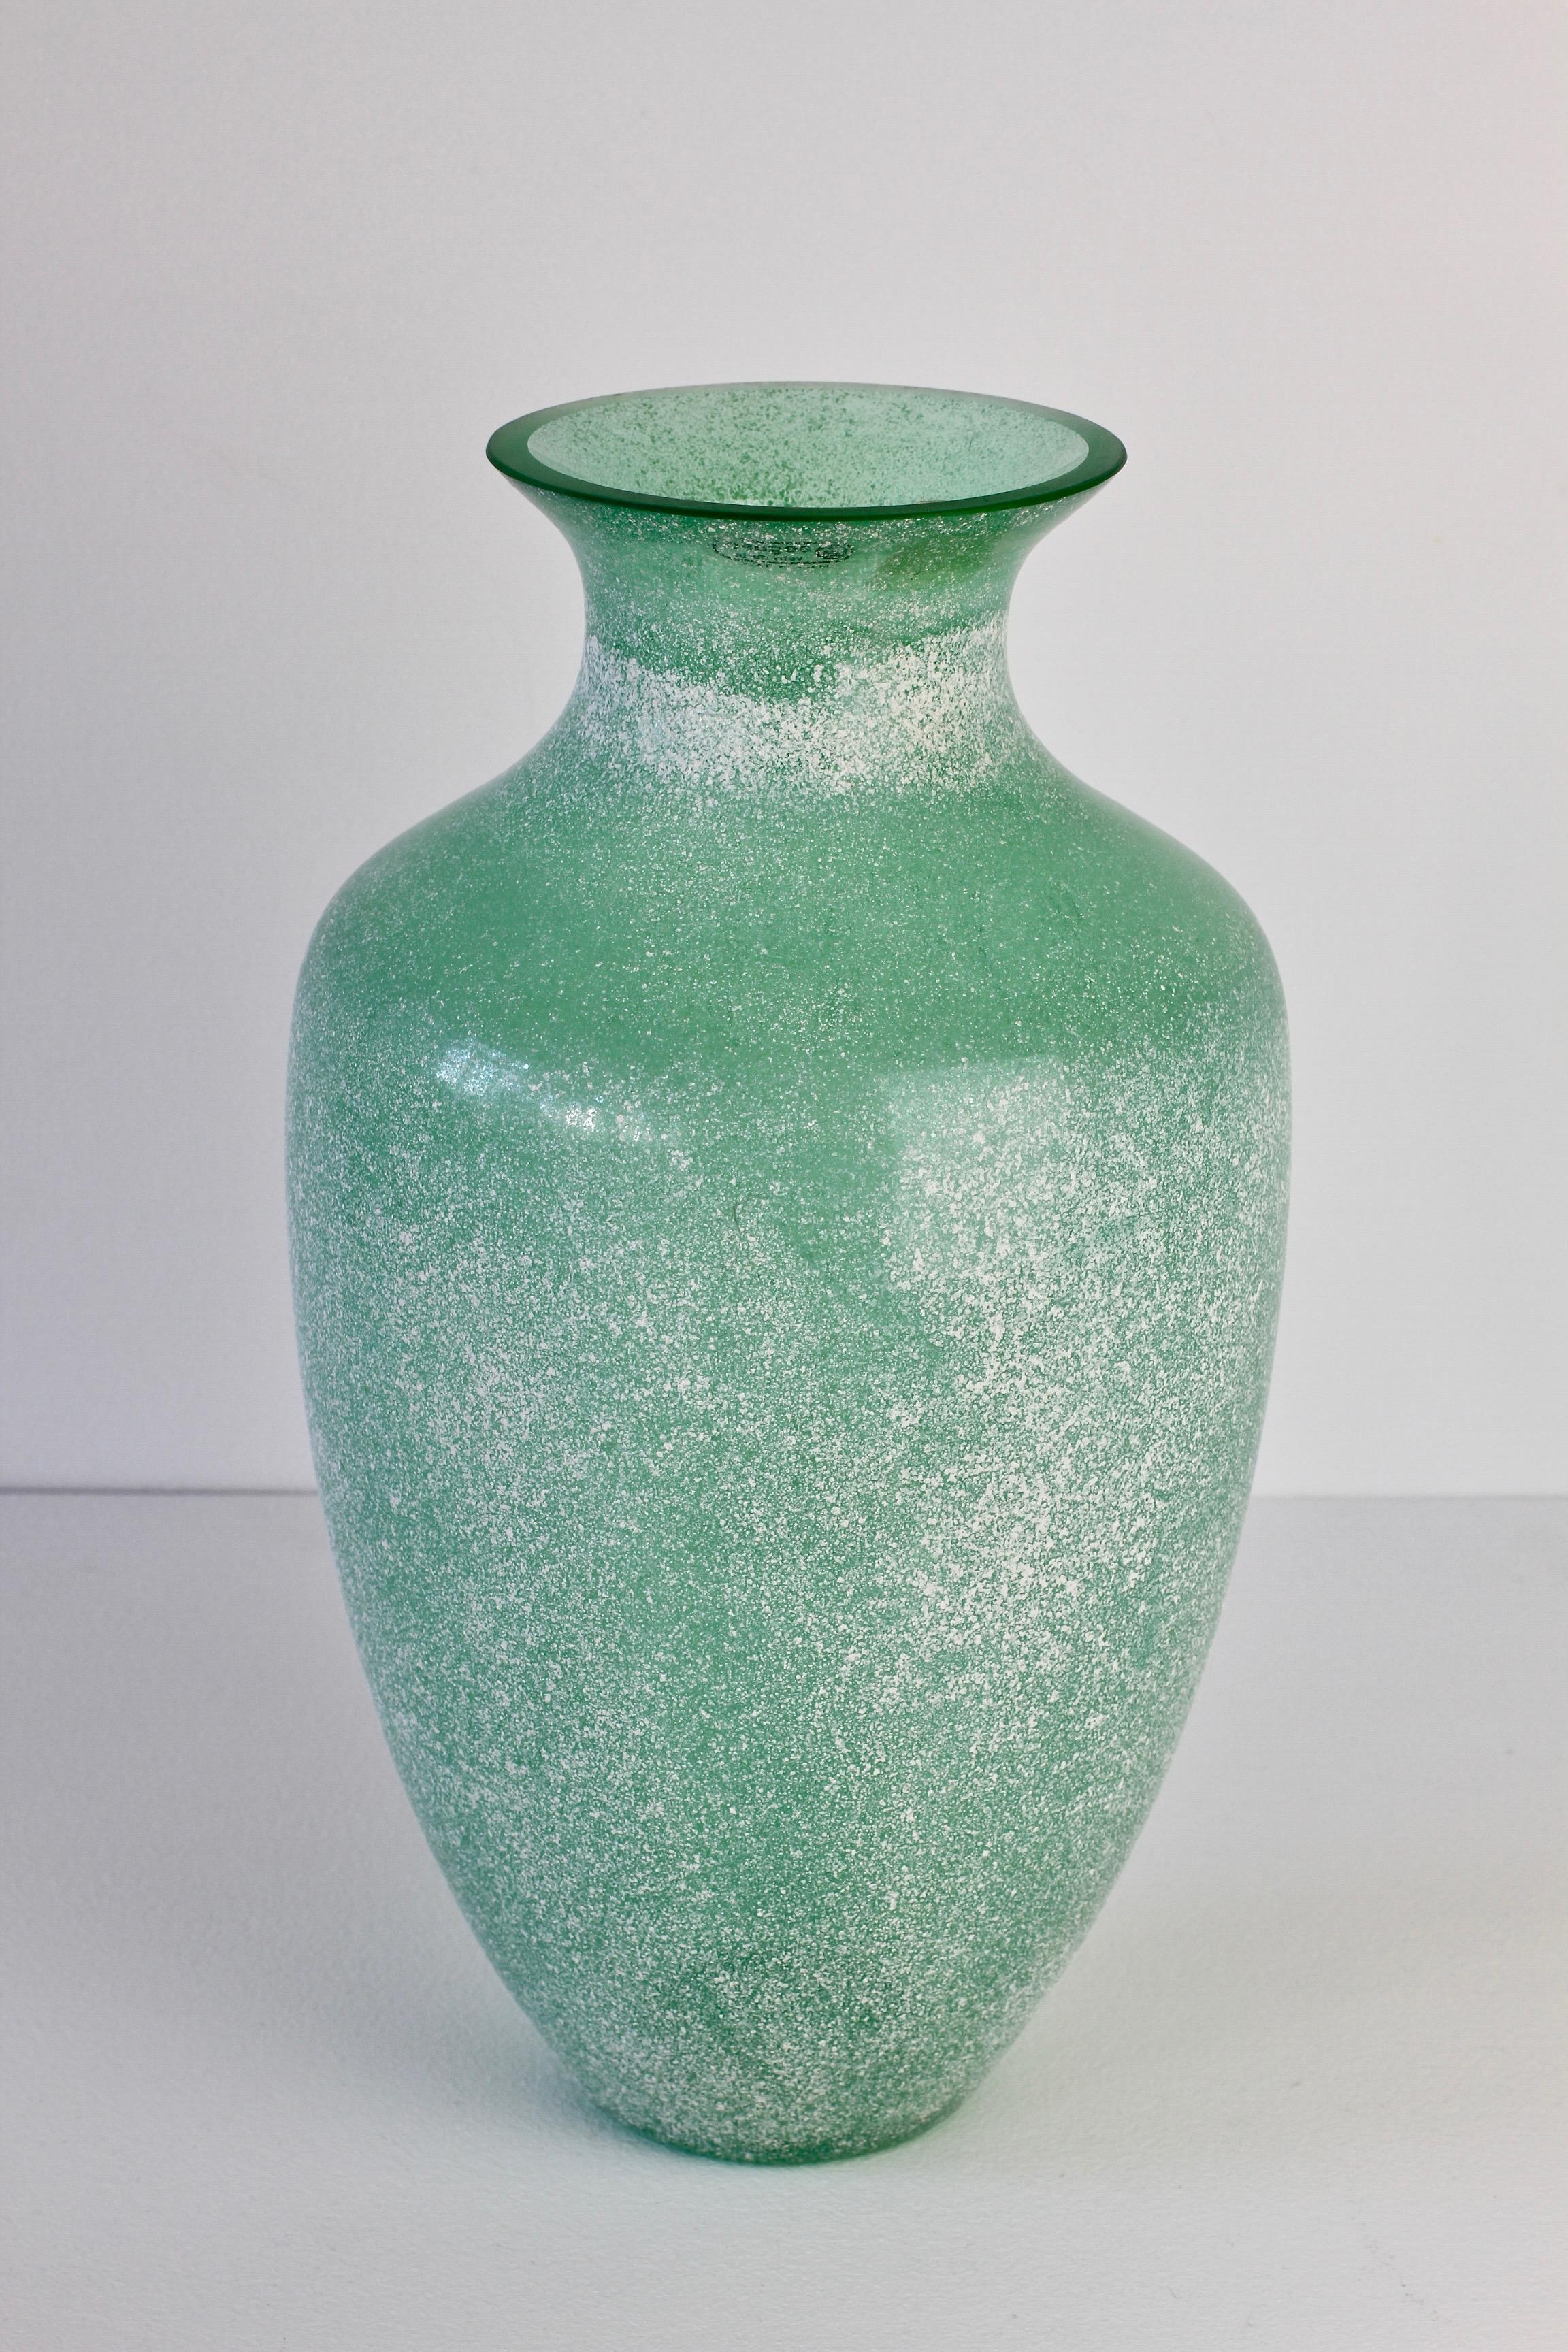 Large 35cm (13.5 inch) tall 'a Scavo' green colored / coloured glass vase by Seguso Vetri d'Arte Murano, Italy. Elegant in form and showing extraordinary craftmanship with the use of the 'Scavo' technique to replicate to look and feel of ancient